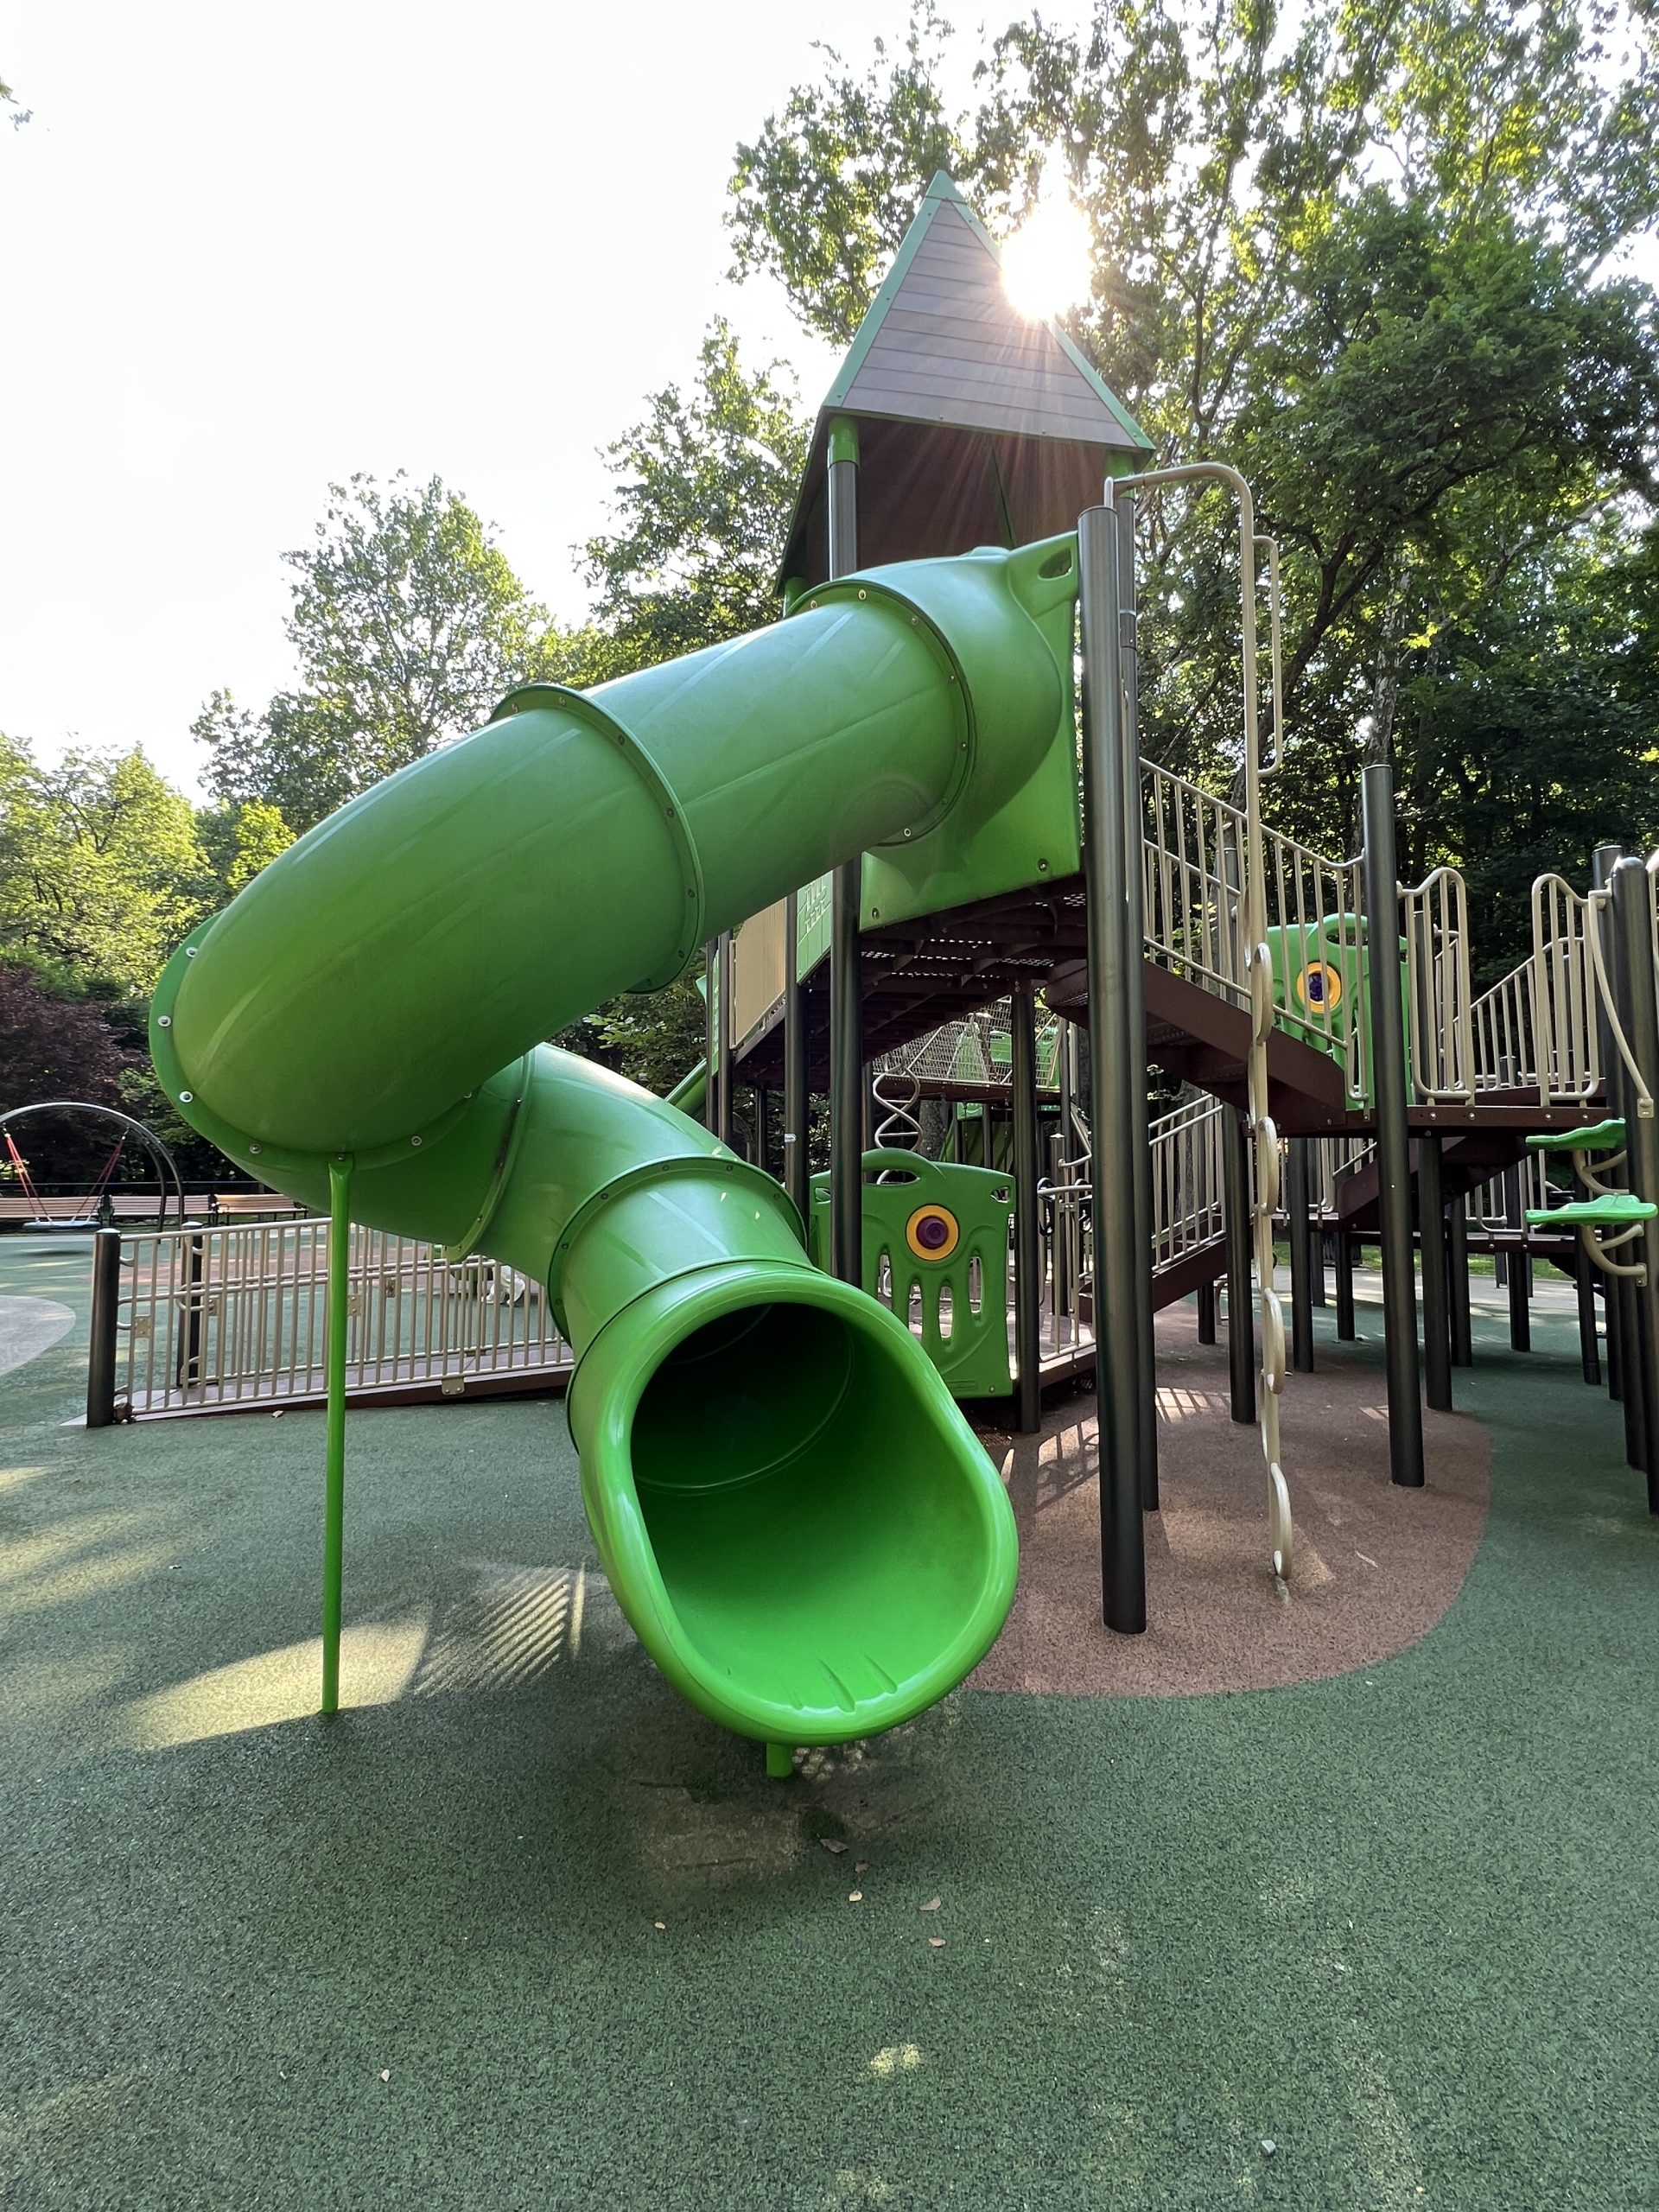 Grover Cleveland Playgrounds in Caldwell NJ - Large Playground Structure - SLIDE twisting tunnel slide